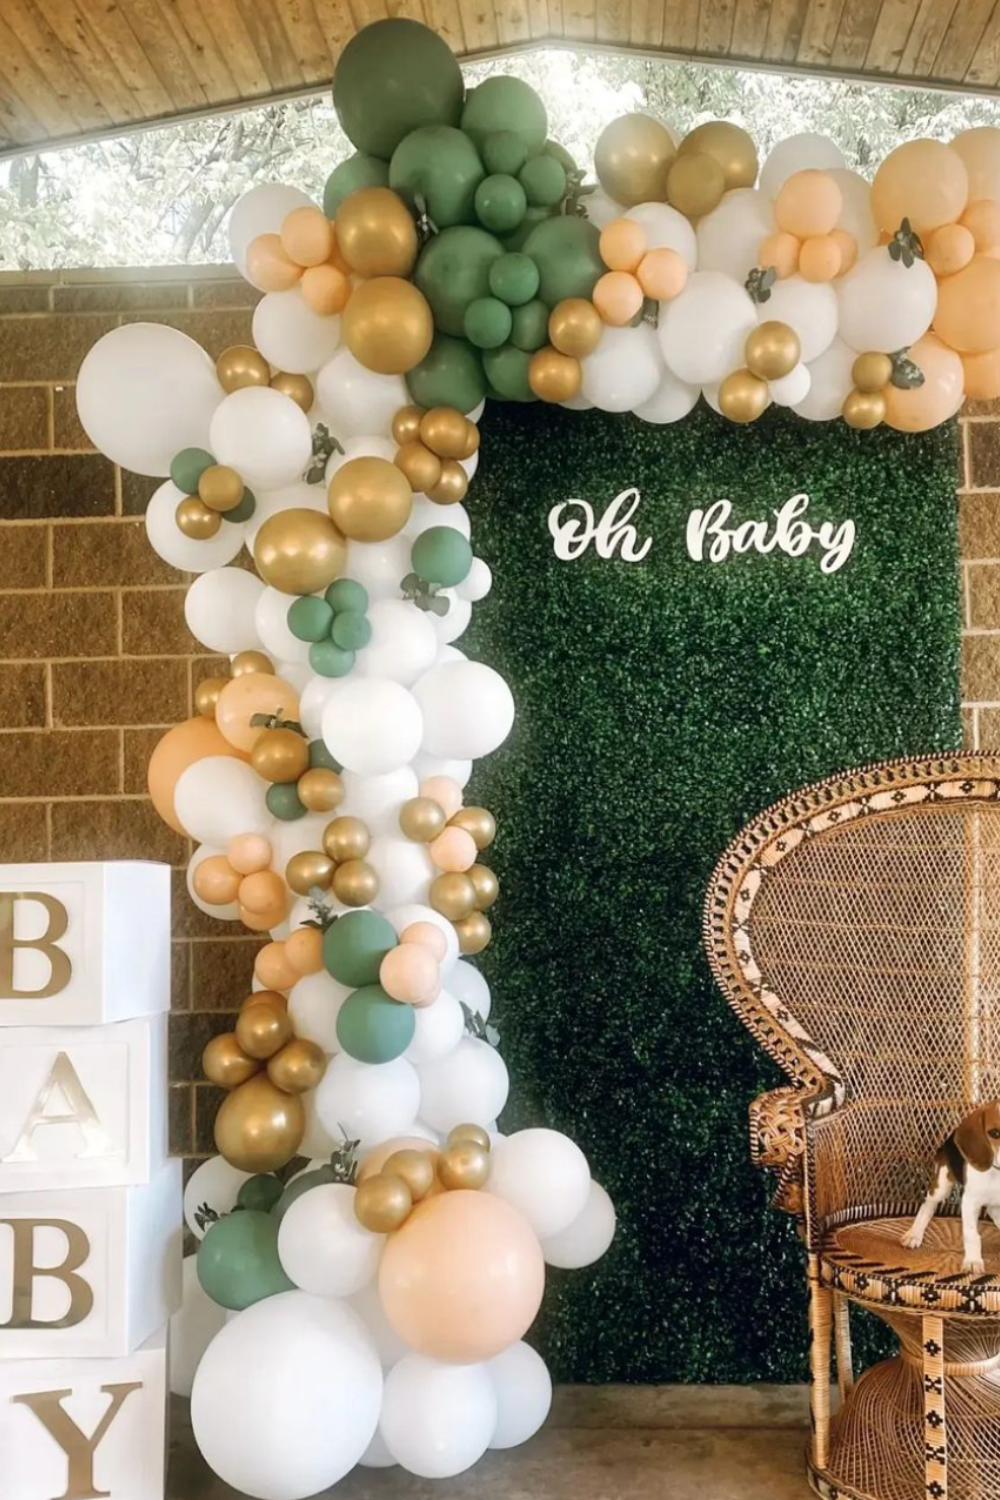 Wedding and event backdrop rentals, boxwood wall